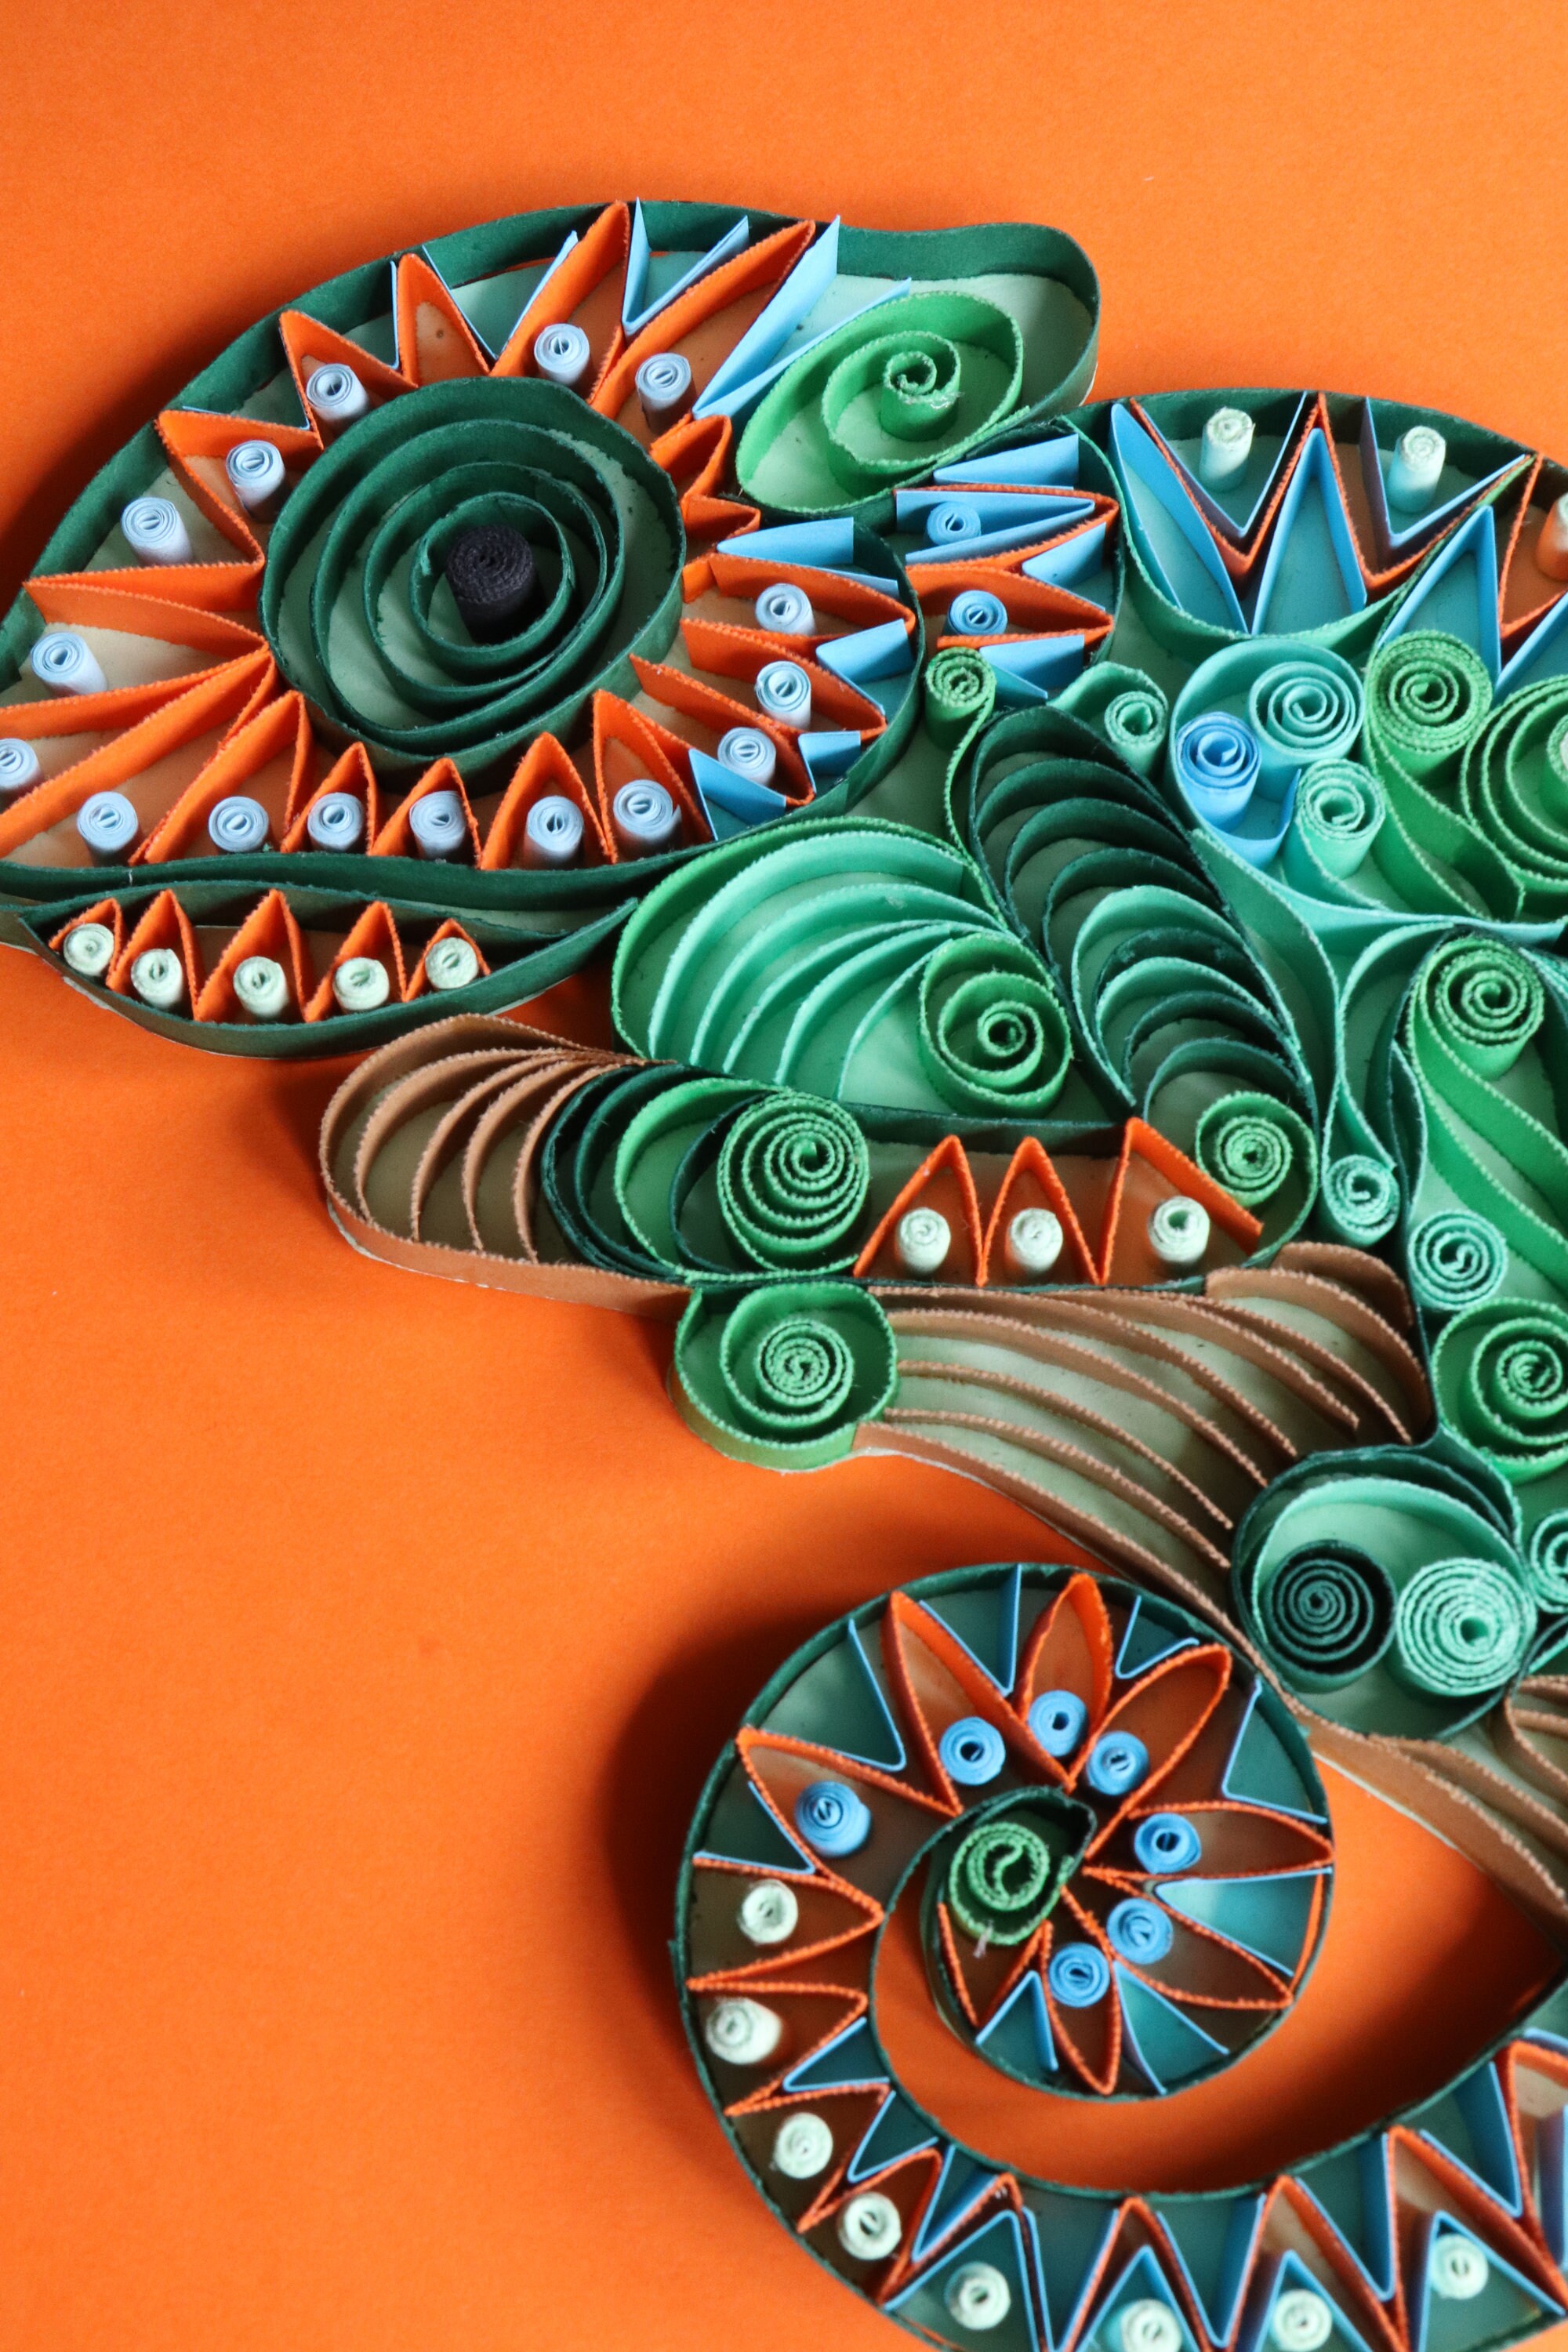 Quilling: The Ancient Papercraft Making A Comeback - PaperPapers Blog